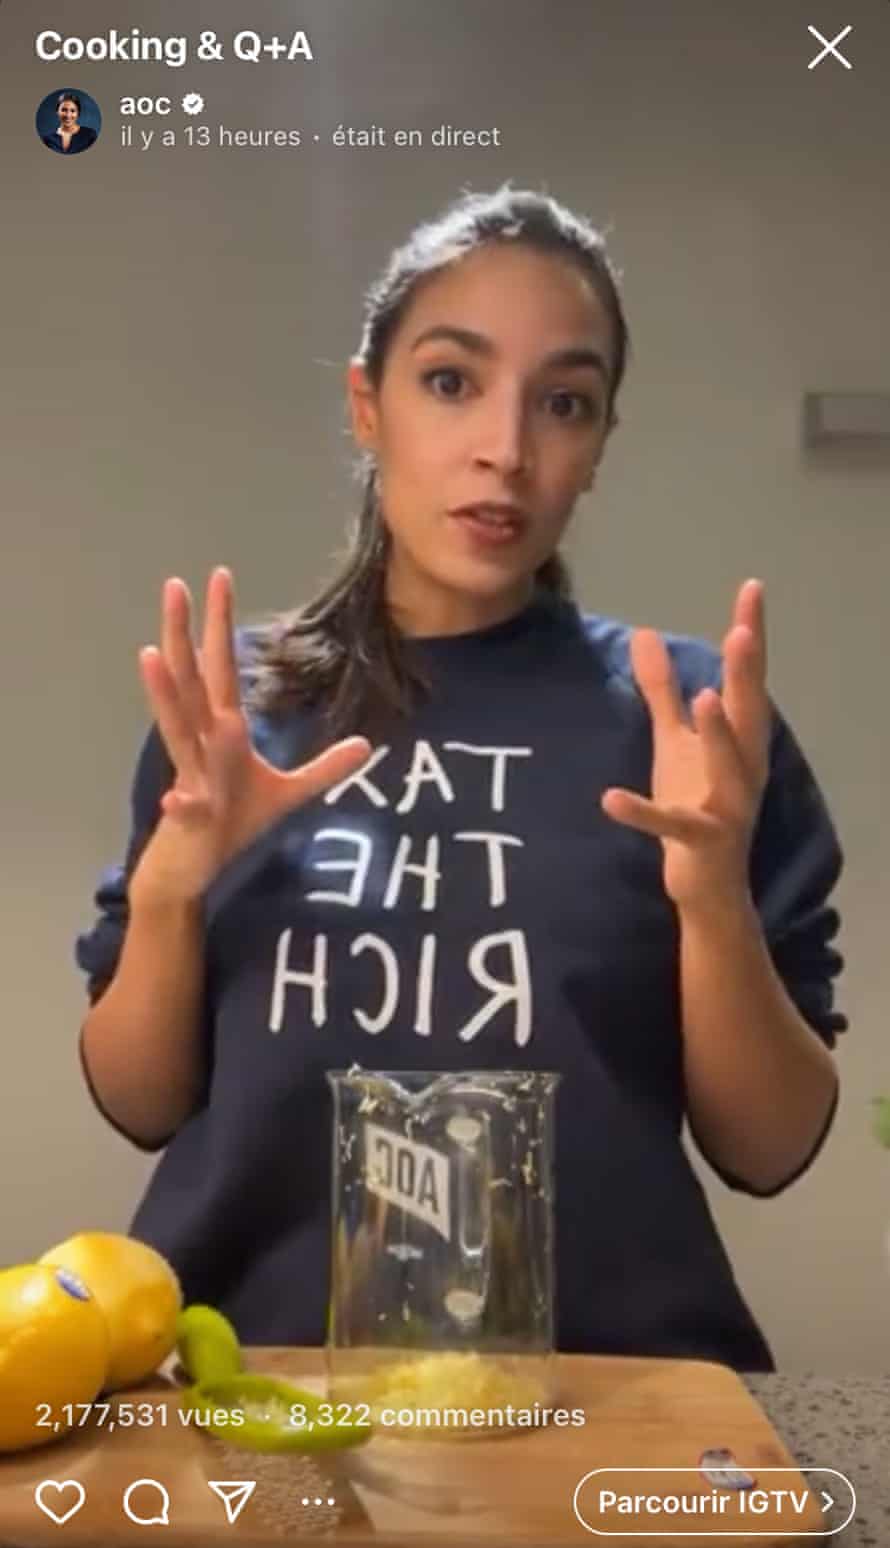 Alexandria Ocasio-Cortez cooks while lecturing her viewers about politics.